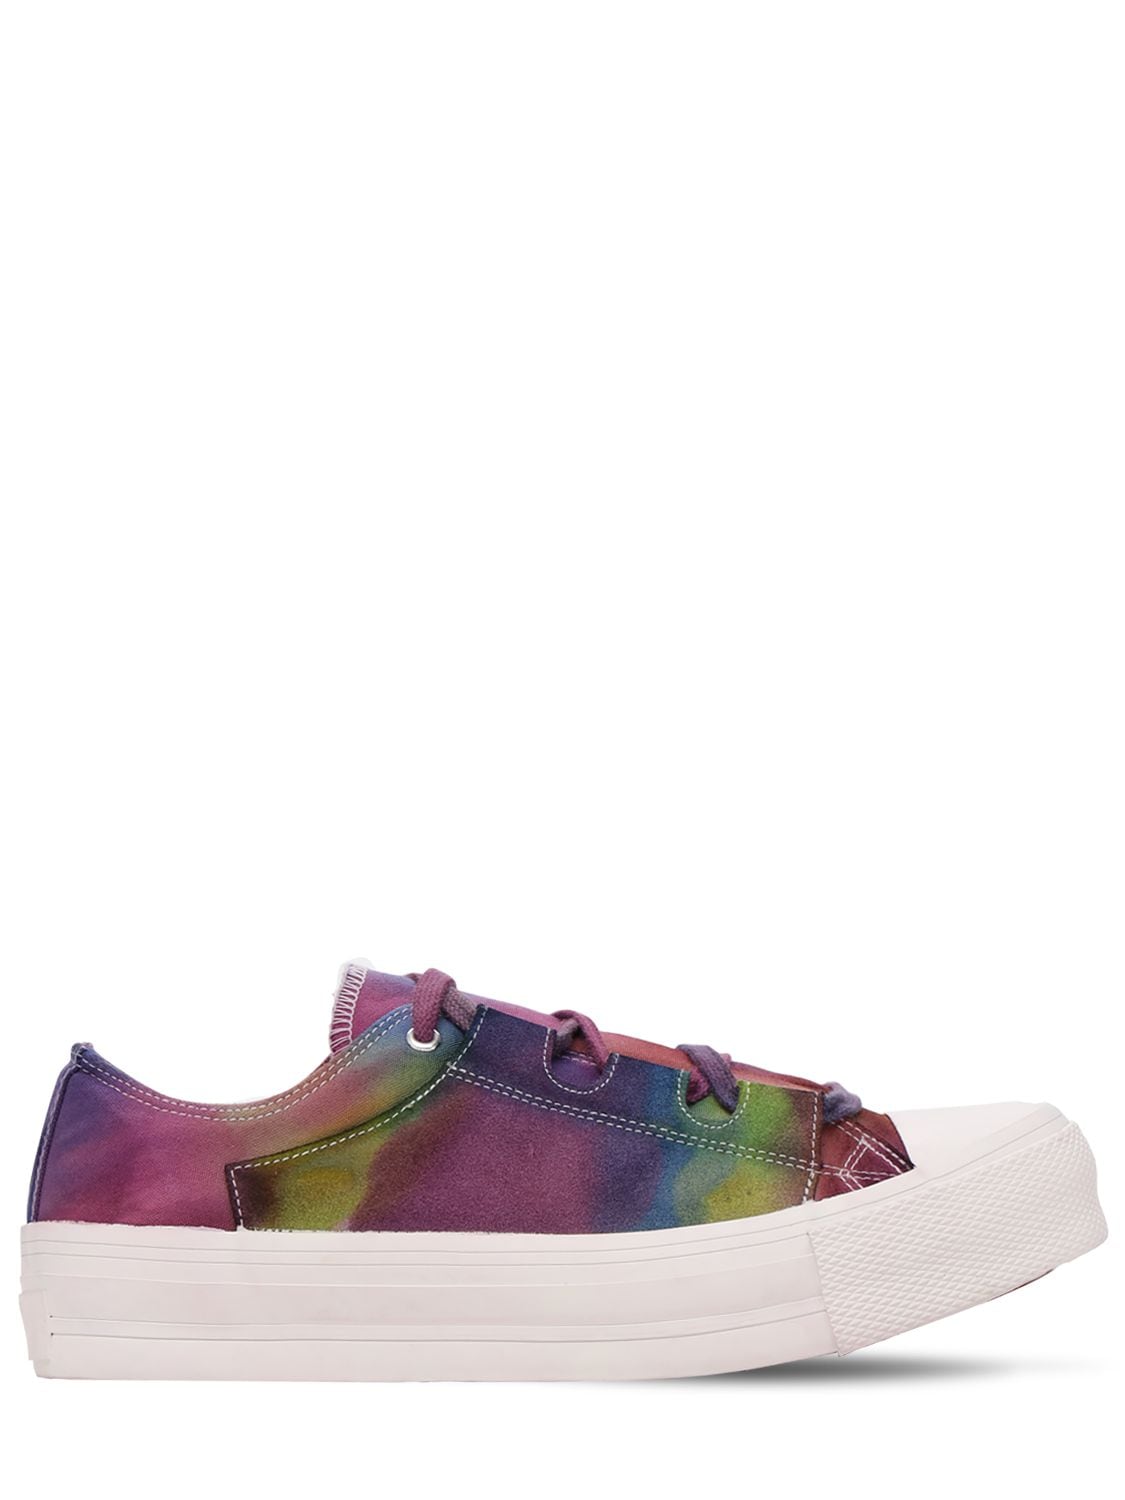 Needles Ghillie Dyed Cotton Canvas Sneakers In Purple,green